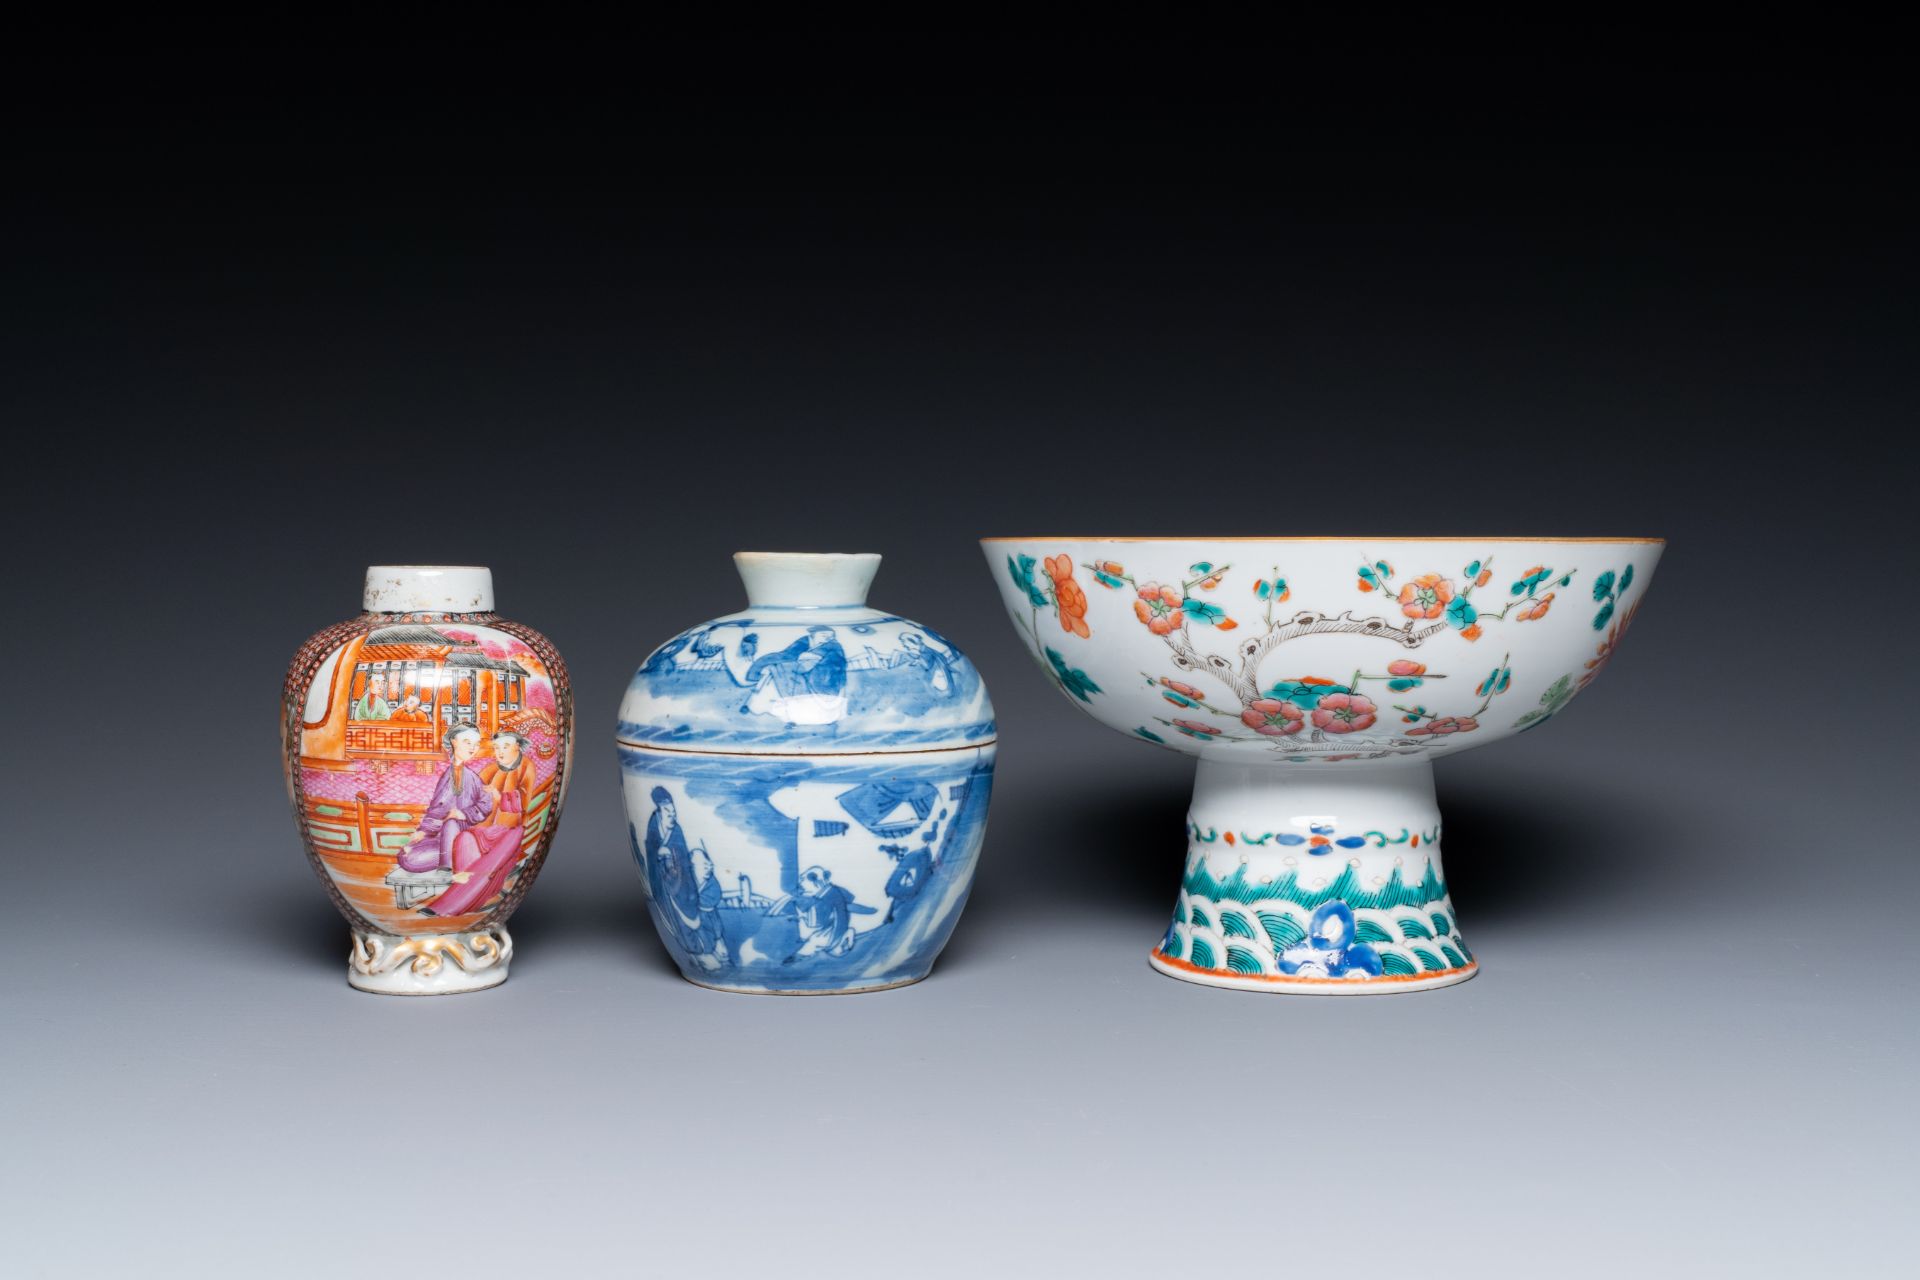 A varied collection of Chinese porcelain, 18/19th C. - Image 4 of 11